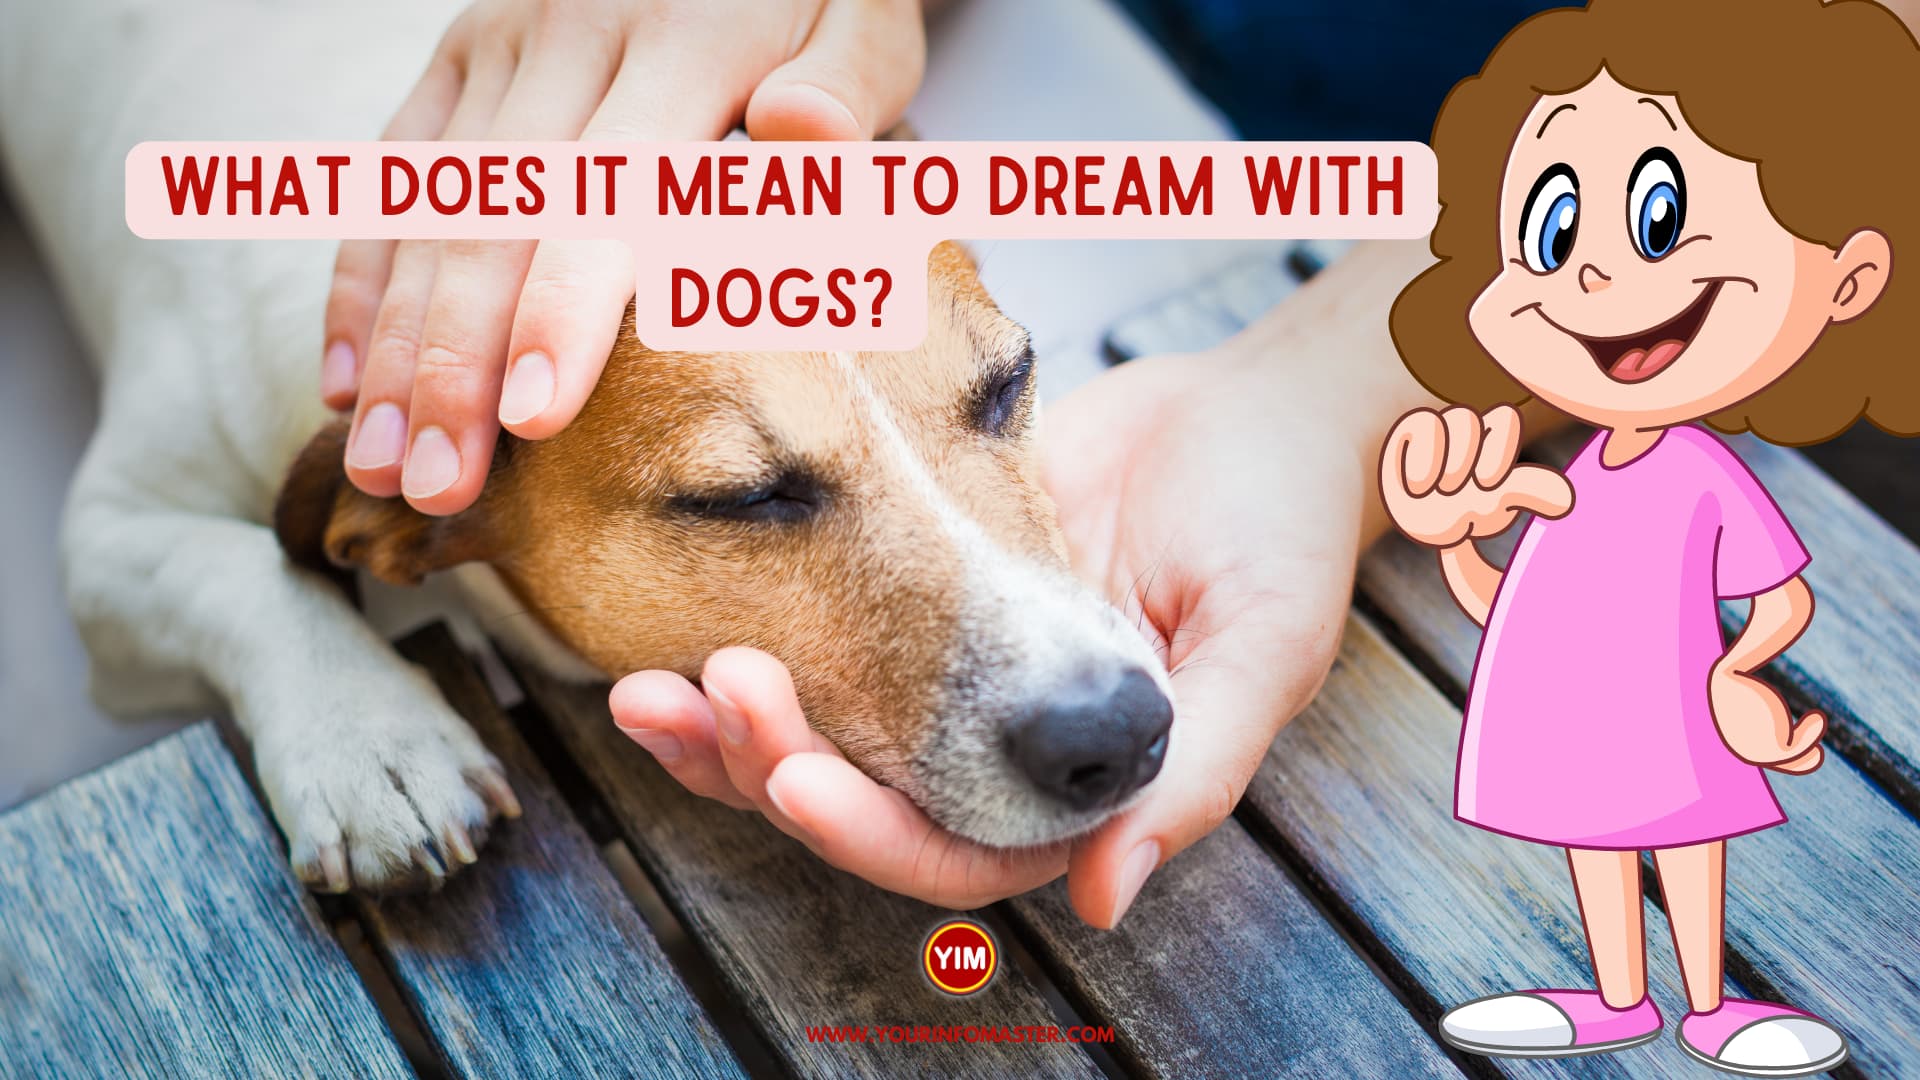 What does it mean to dream with dogs